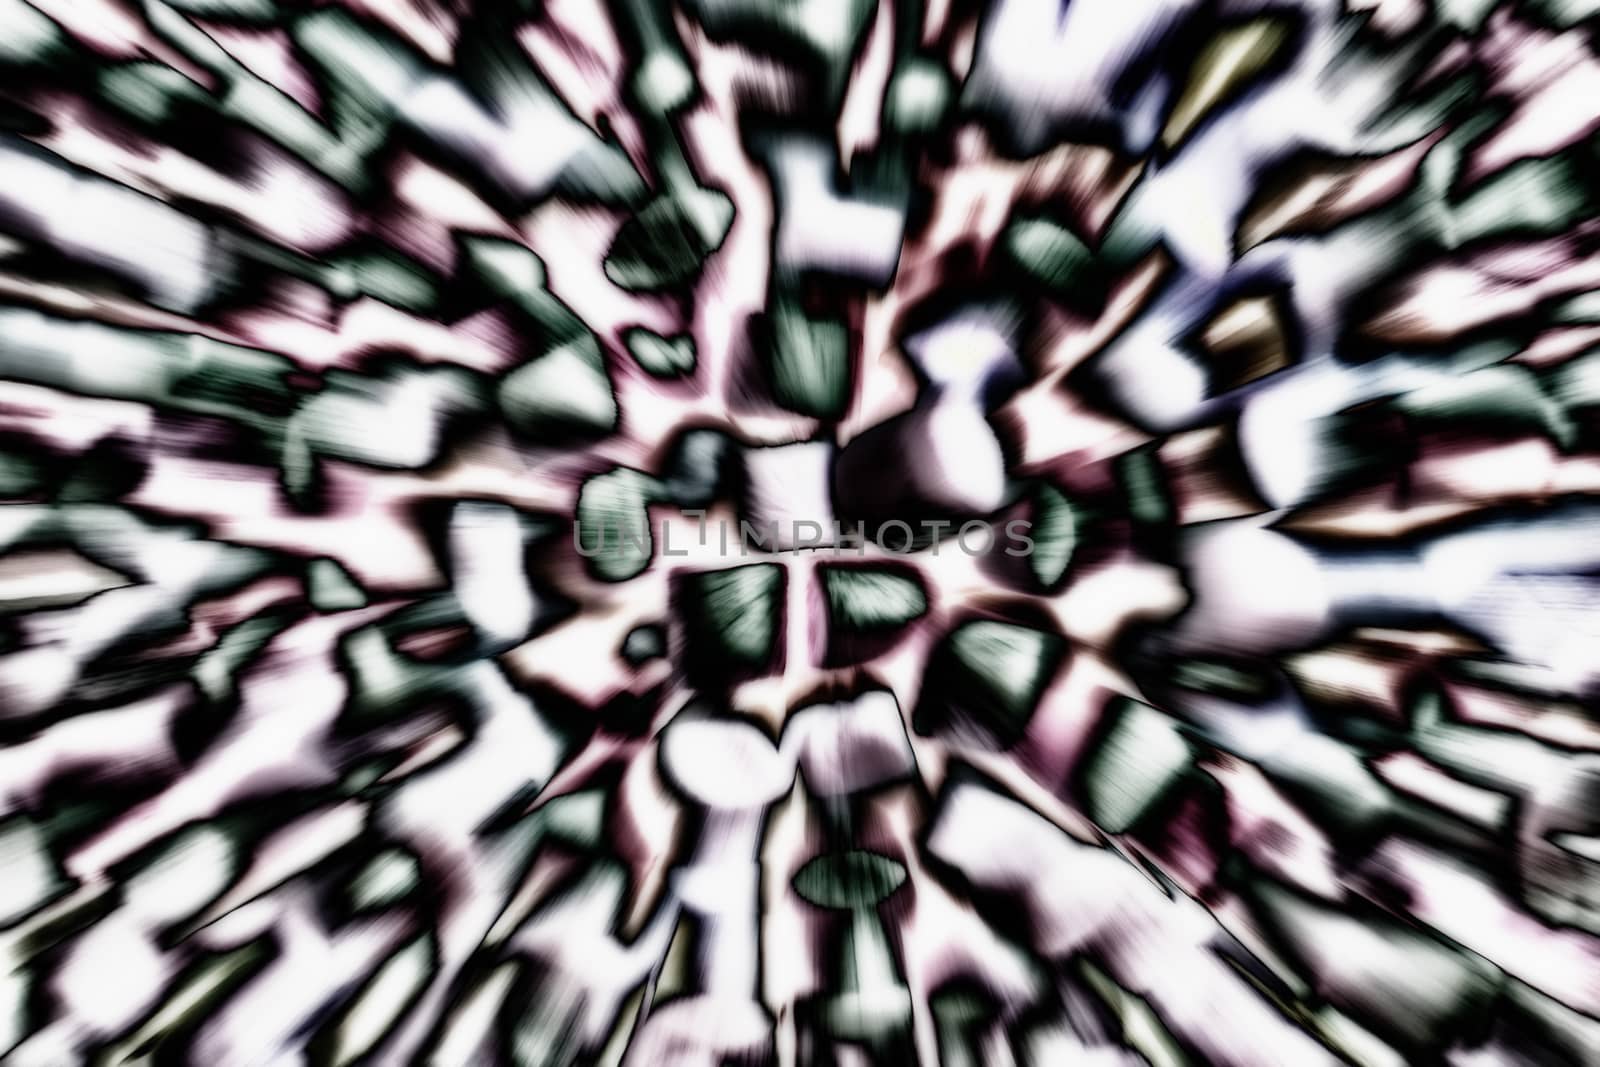 Zoom burst visual effect background of  abstract digital cube computer graphic